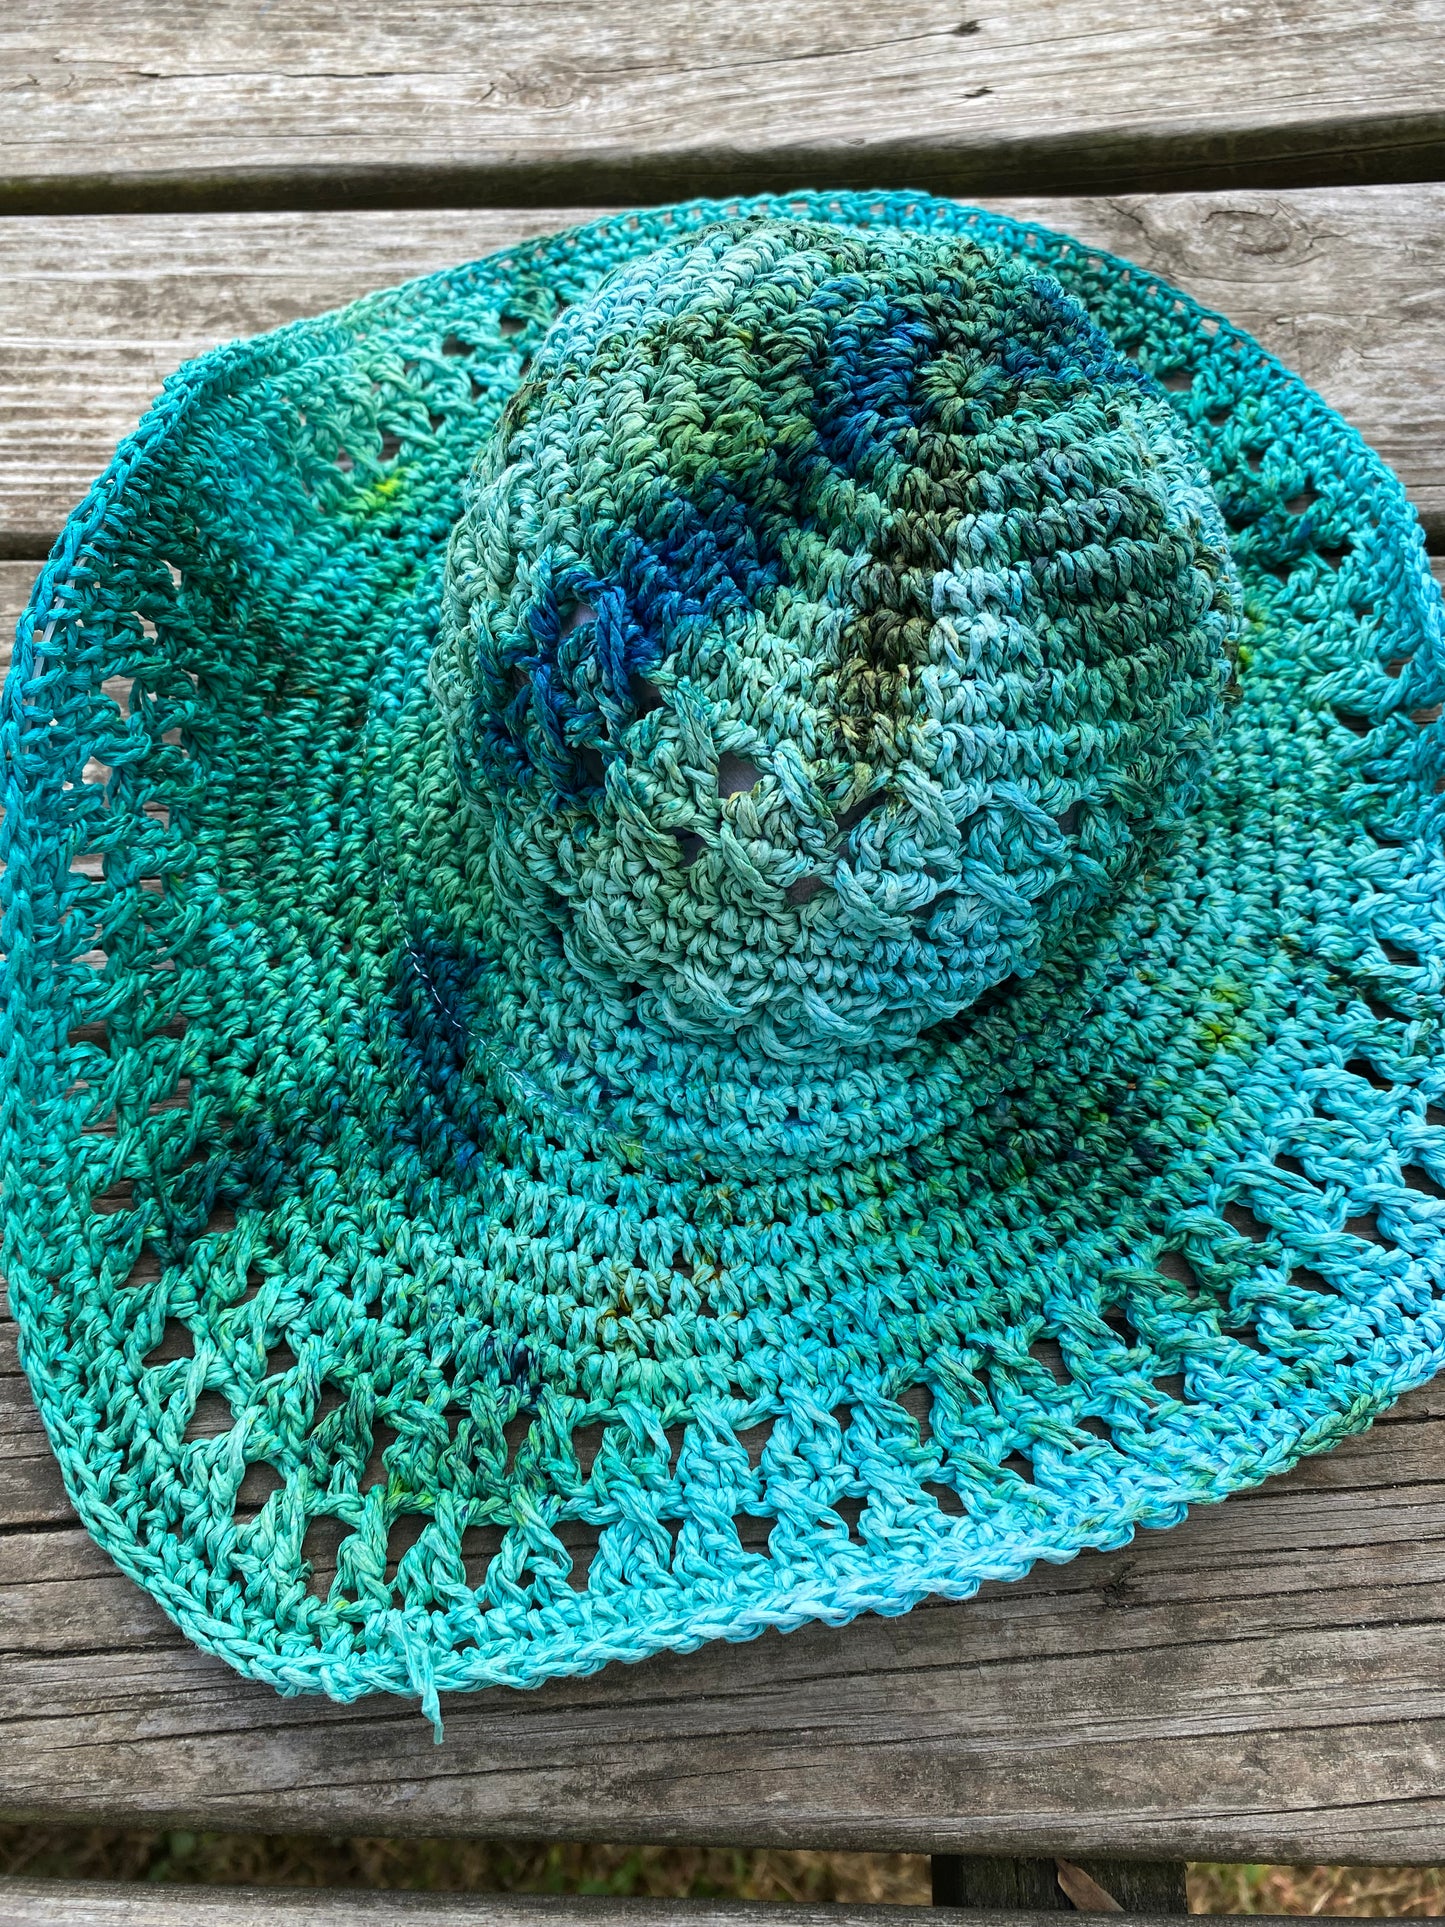 Paper floppy hat teal and blue